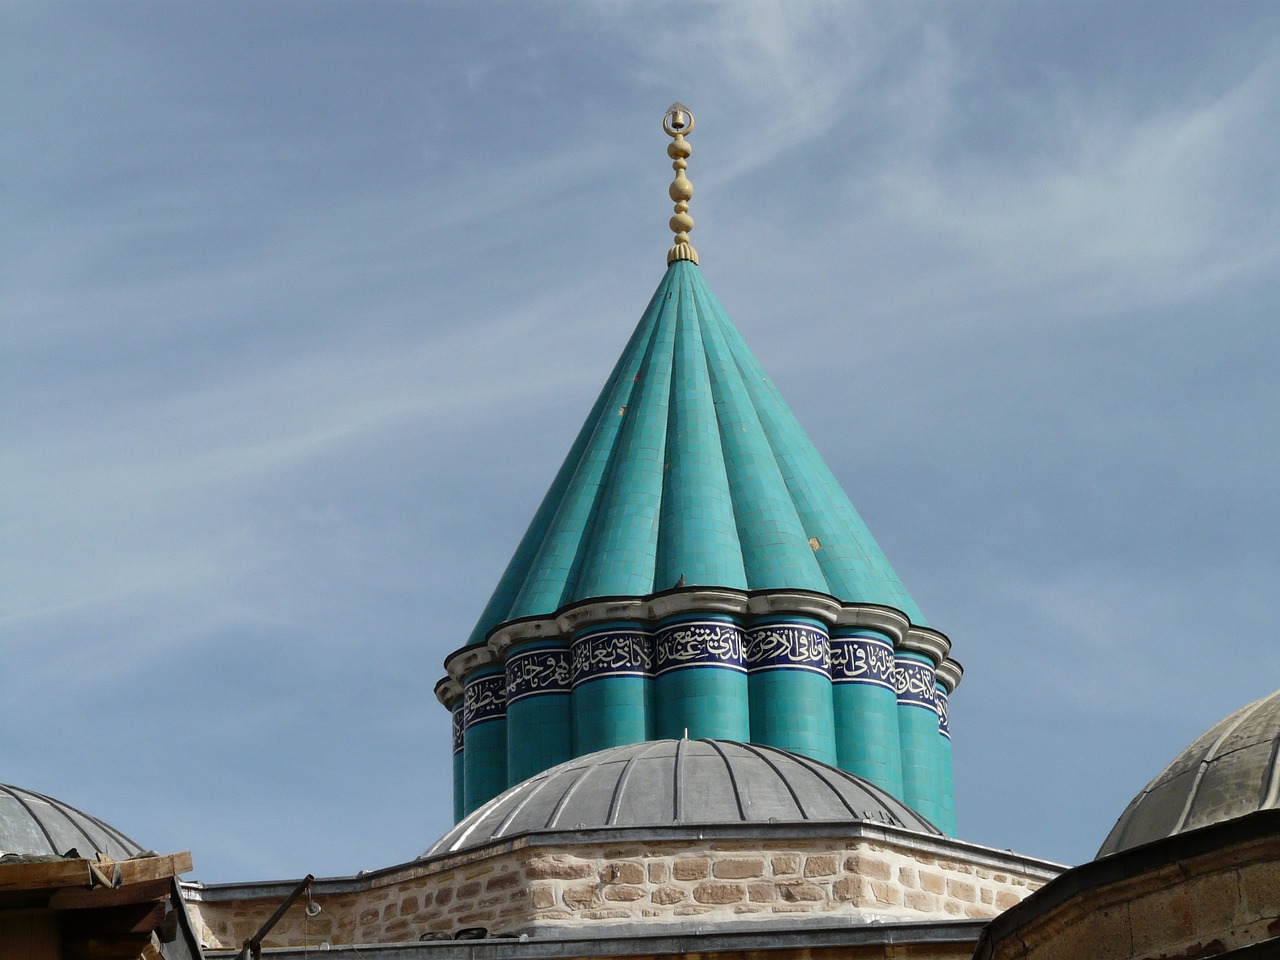 a clock that is on the side of a building, inspired by Osman Hamdi Bey, hurufiyya, pointy conical hat, turquoise color scheme, inside a dome, late 1 9 th century